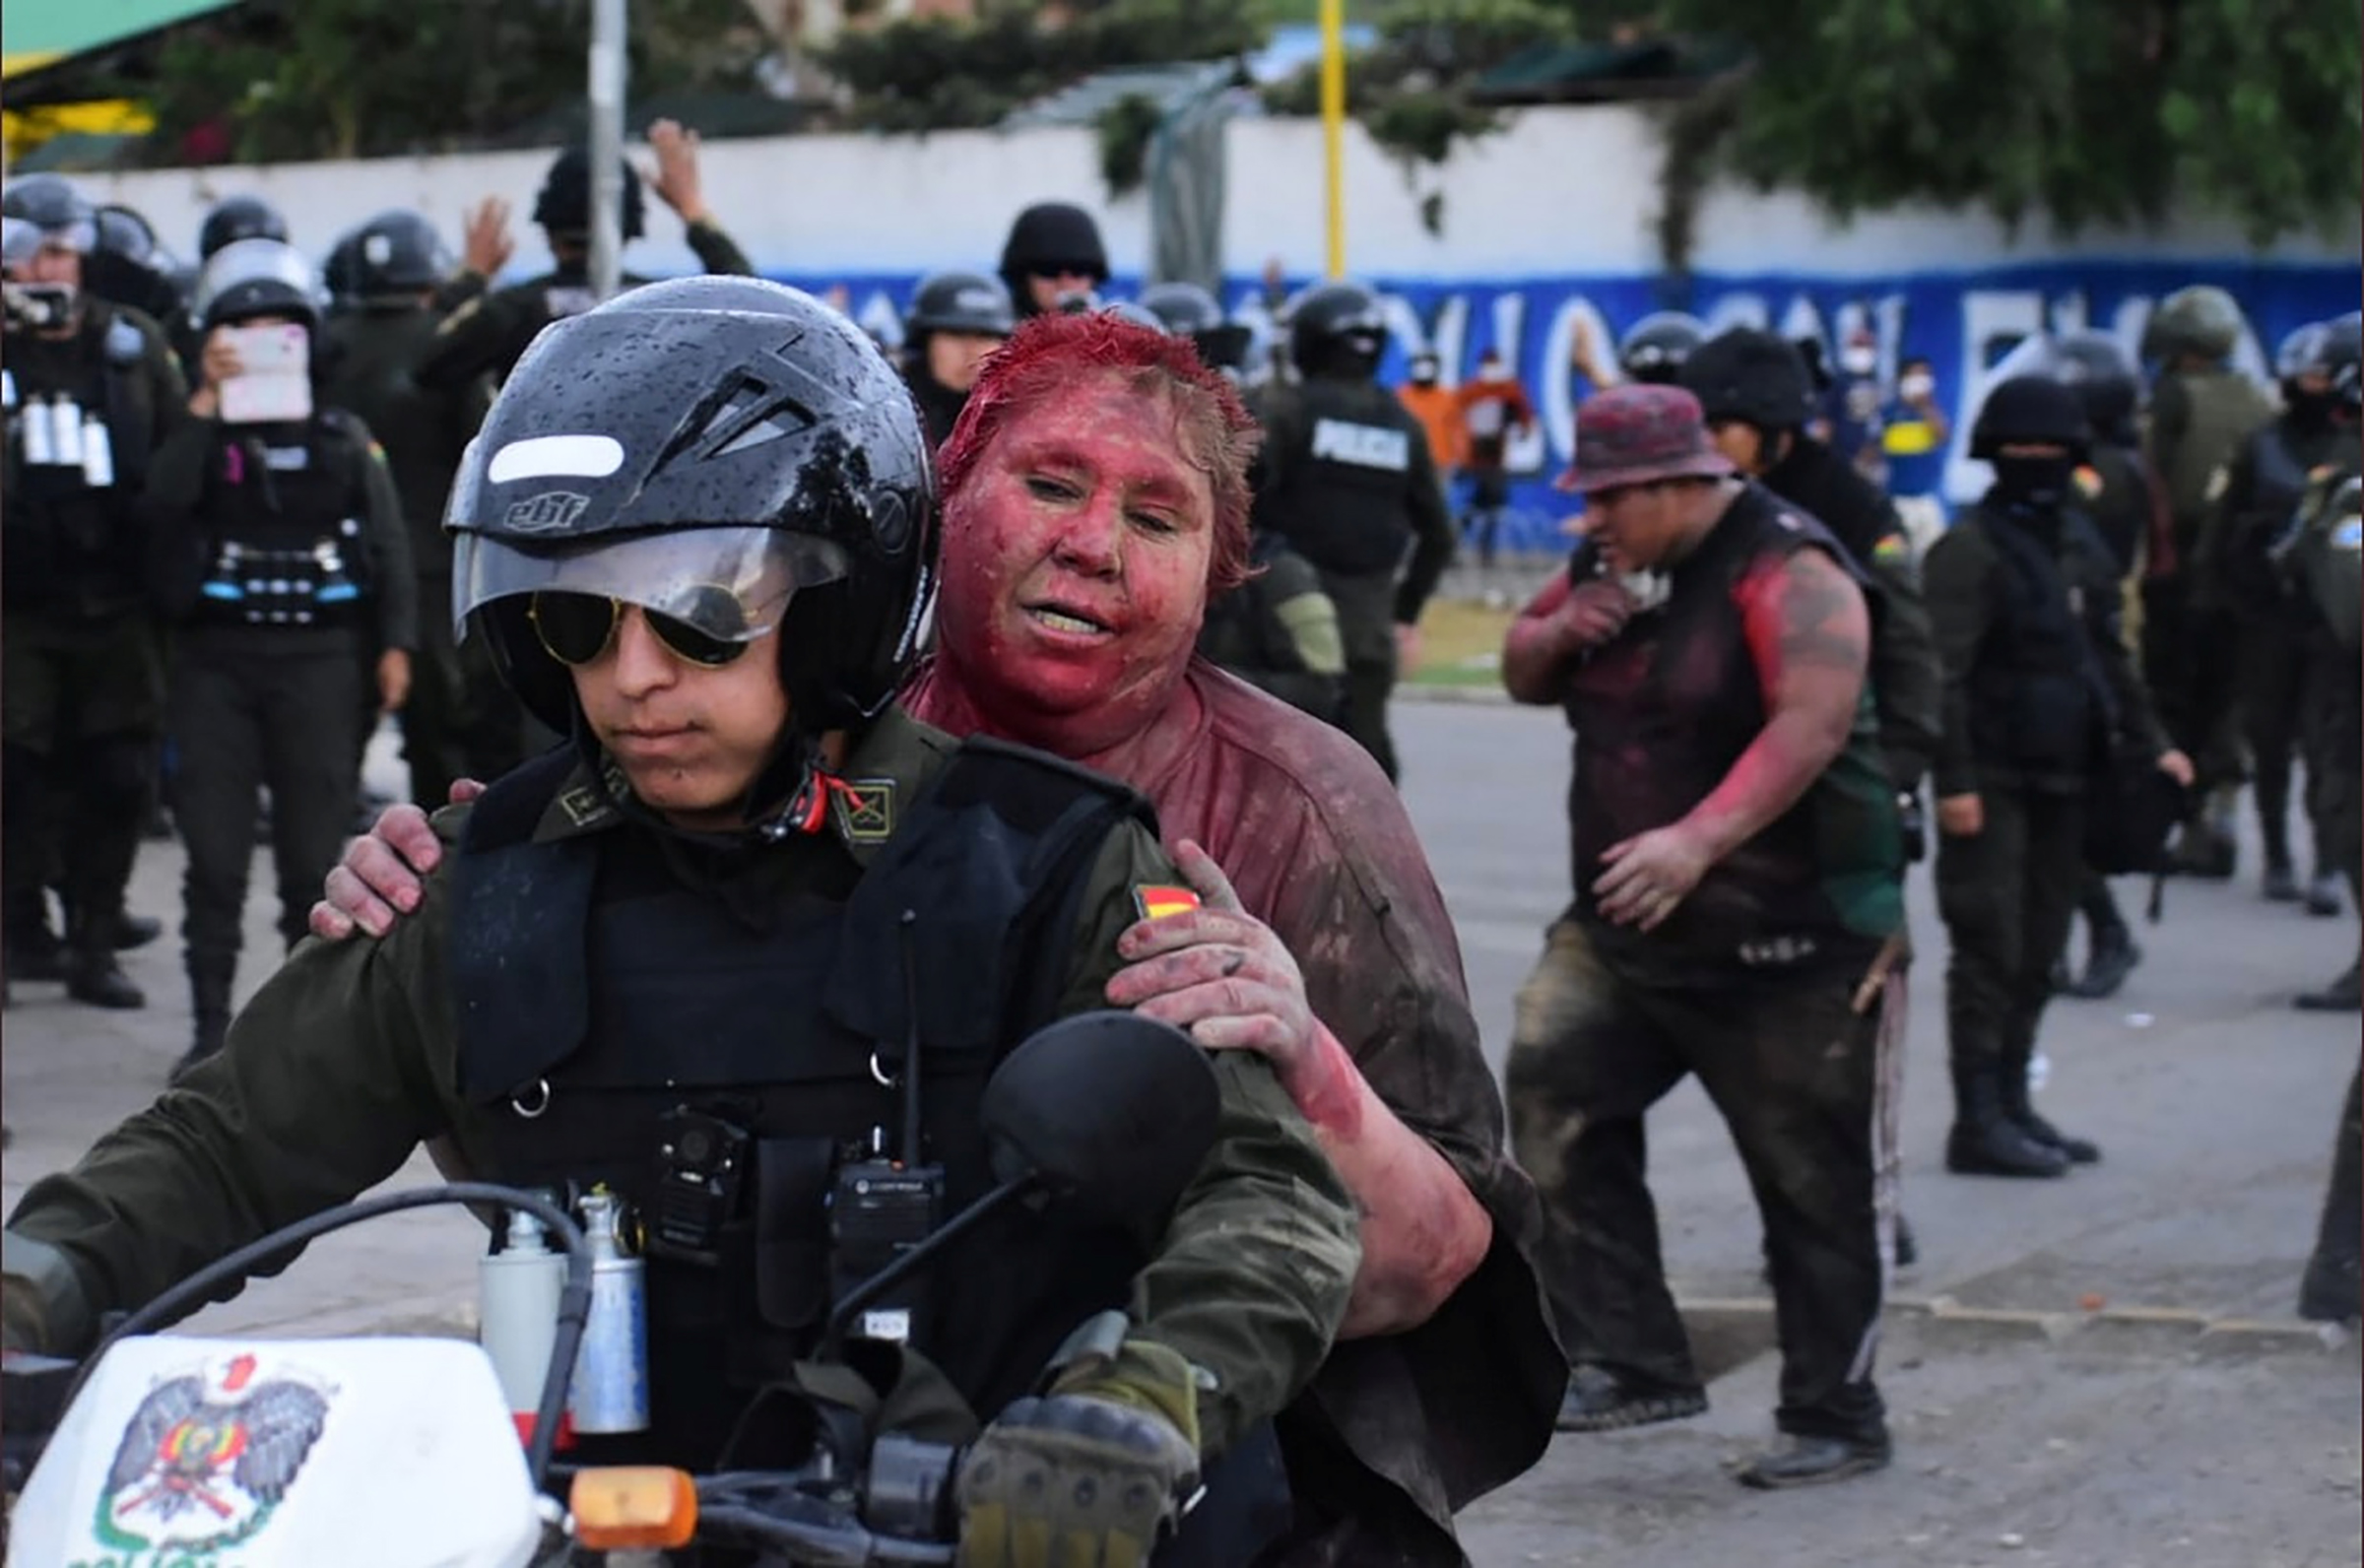 Police rescue Vinto mayor Patricia Arce Guzman on a motorcycle after people threw paint and dirt on her following a fire in Vinto's Town Hall, in Quillacollo, Bolivia, on Nov. 6, 2019. (Daniel James—Los Tiempos Bolivia via Reuters)